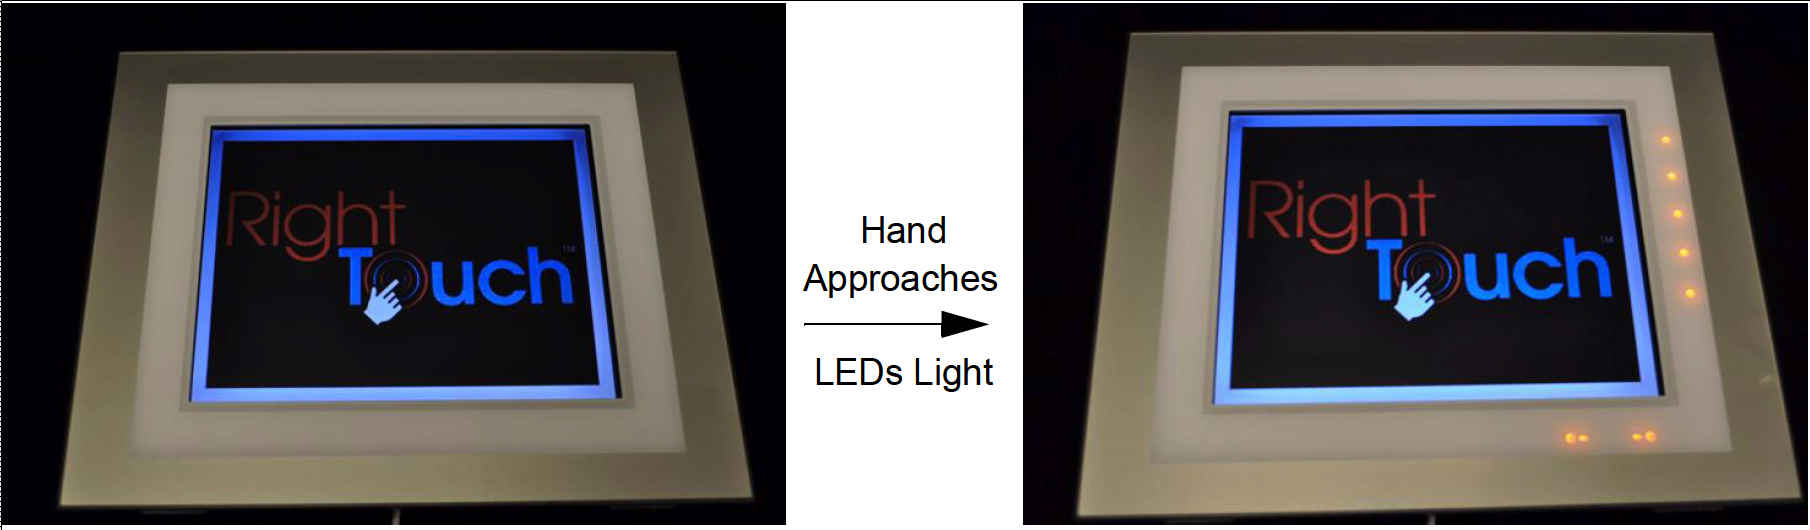 Figure 1 - On the left, the LEDs are off but as a hand approaches the LEDs turn on, as seen on the right